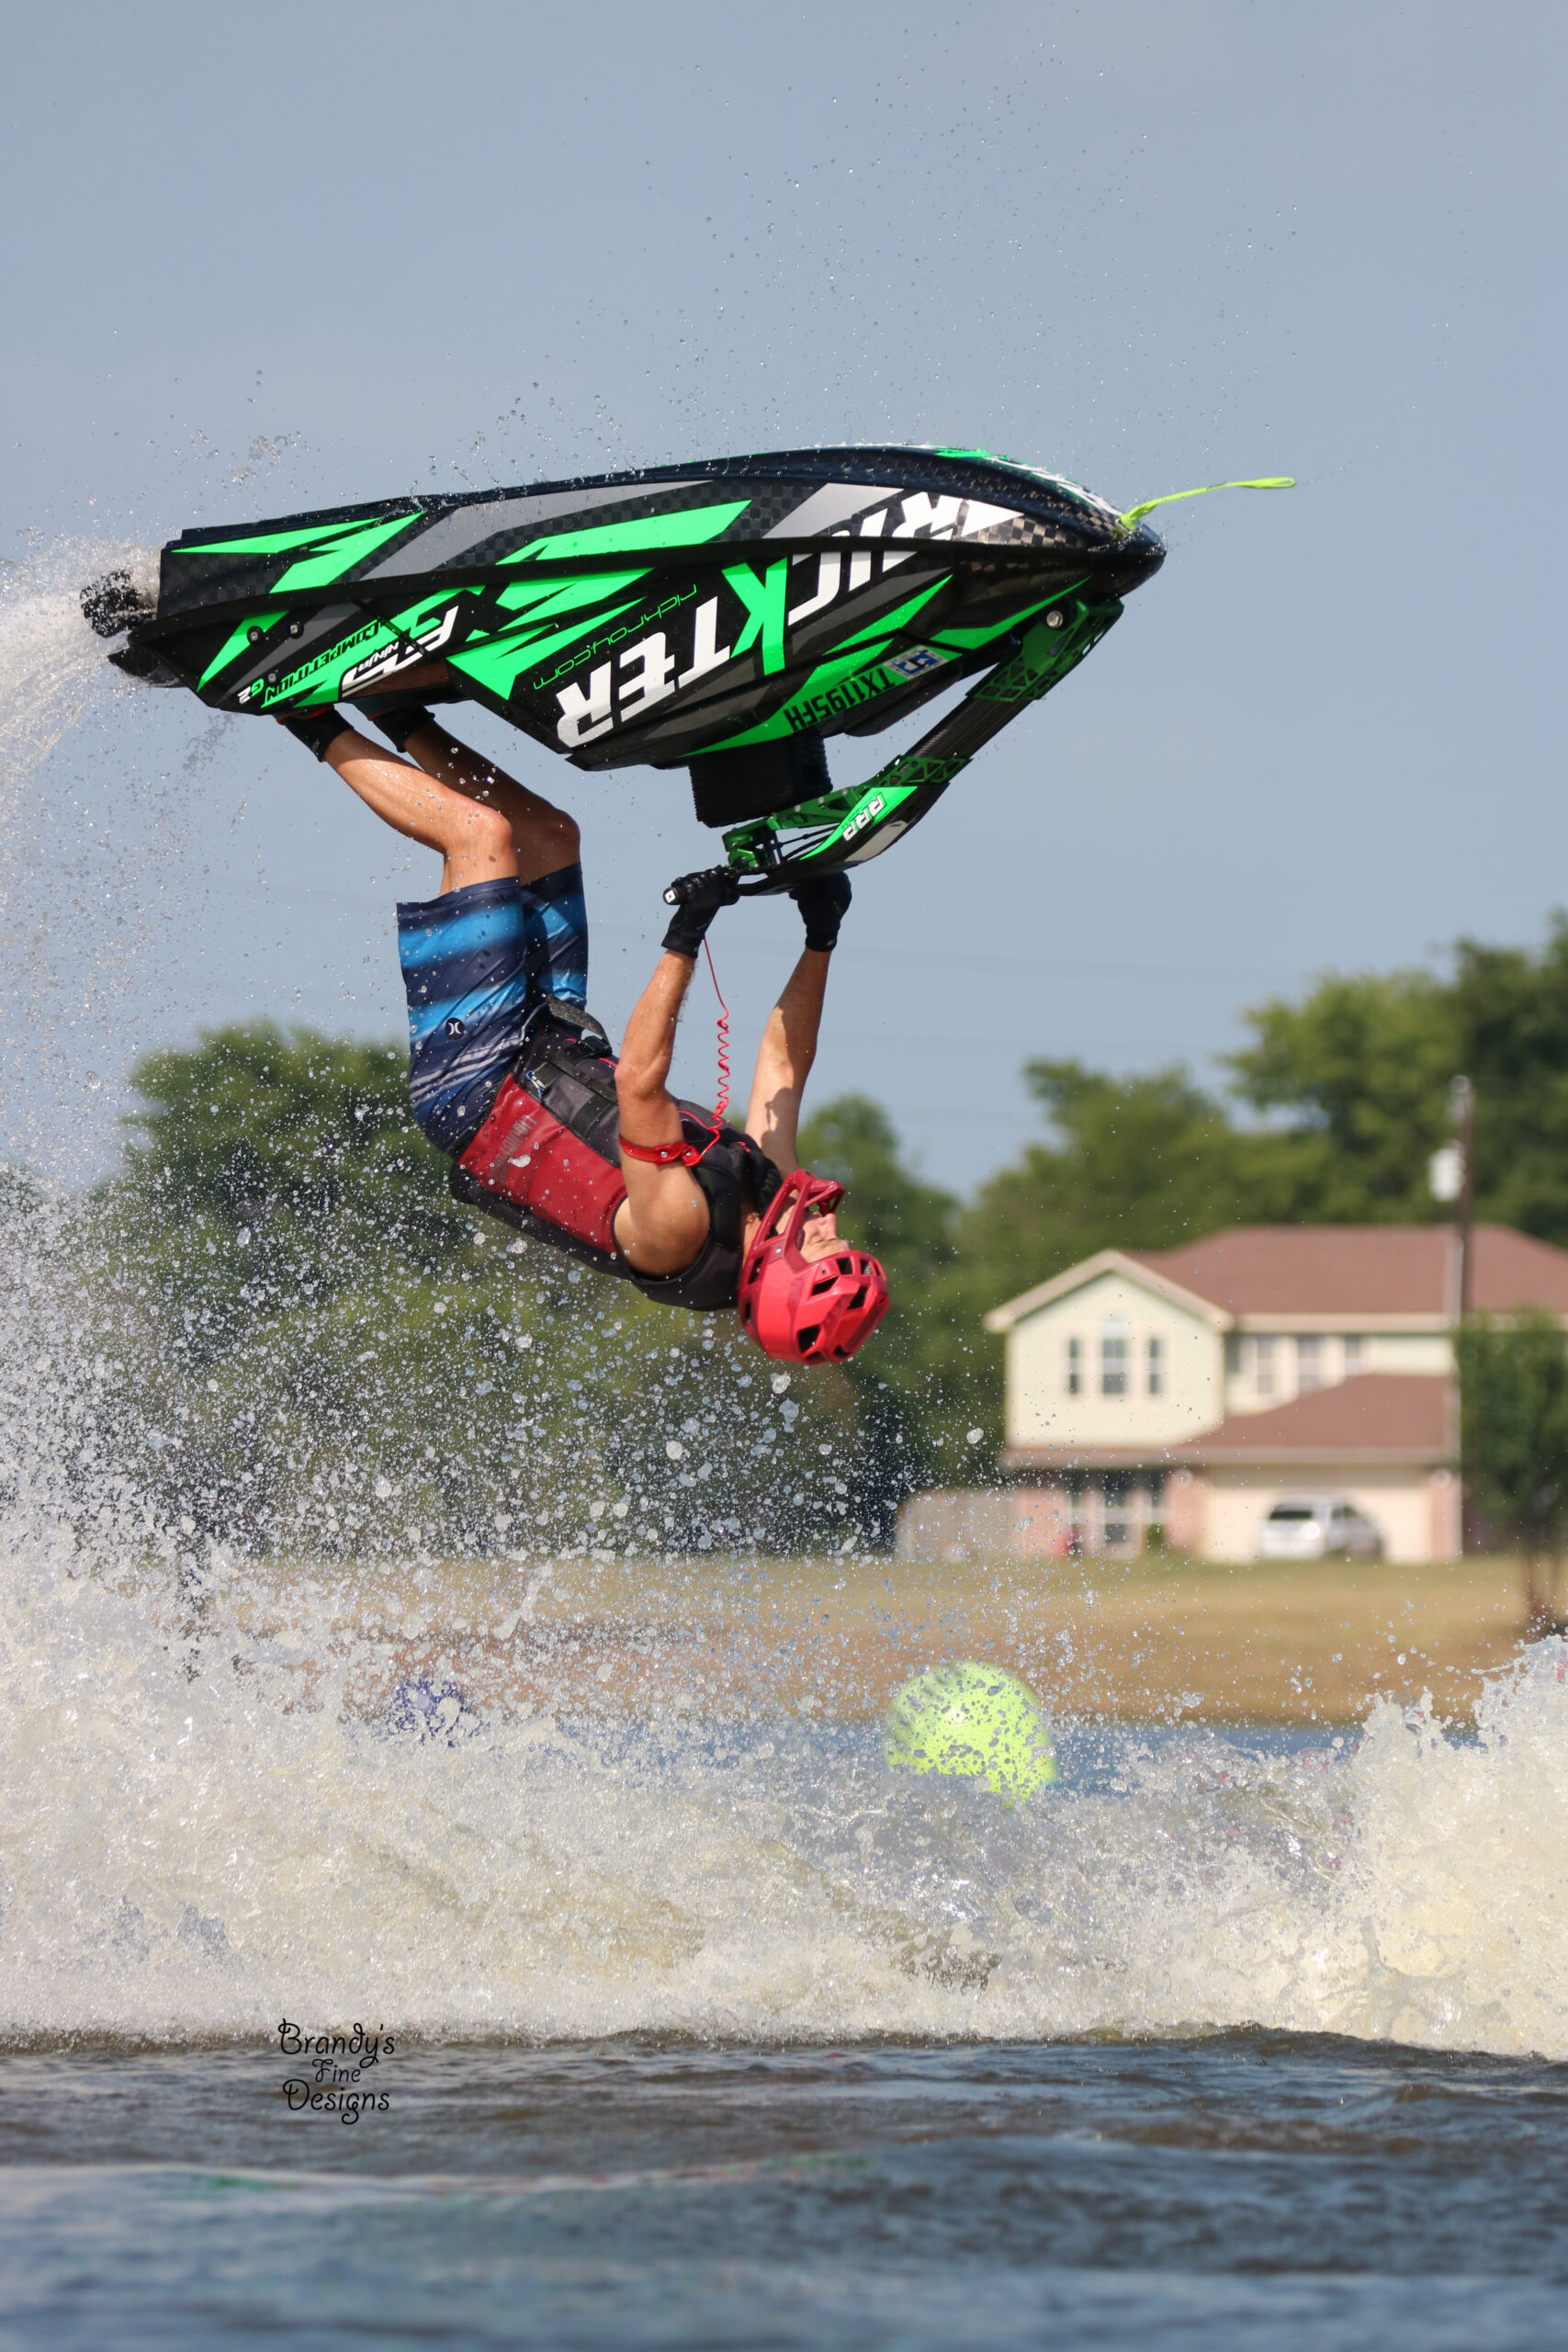 Winners posted from Jettribe Texas Watercross Series